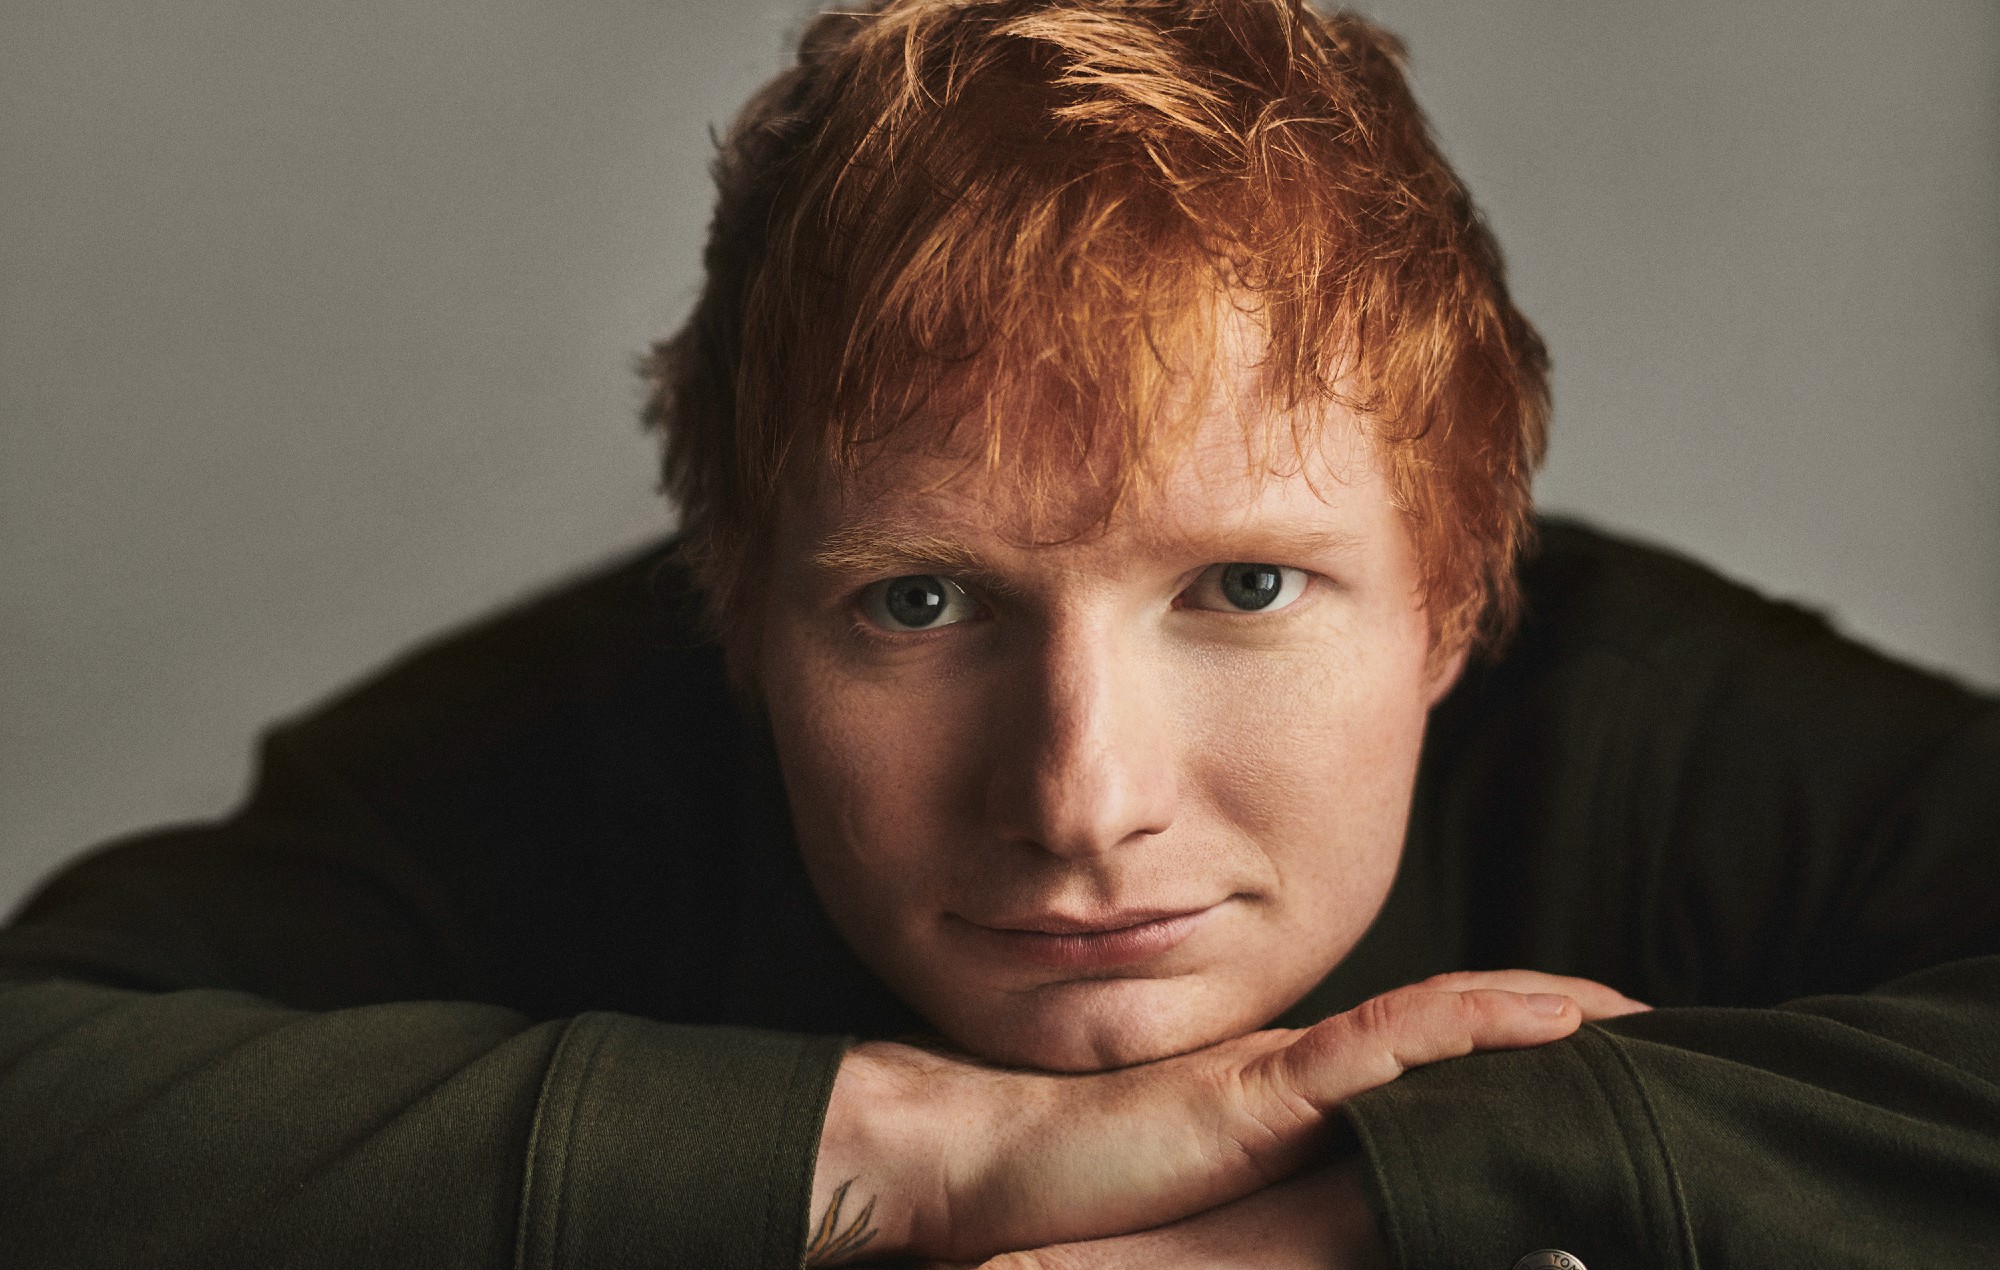 sexy celebs we don't think are hot - Ed Sheeran